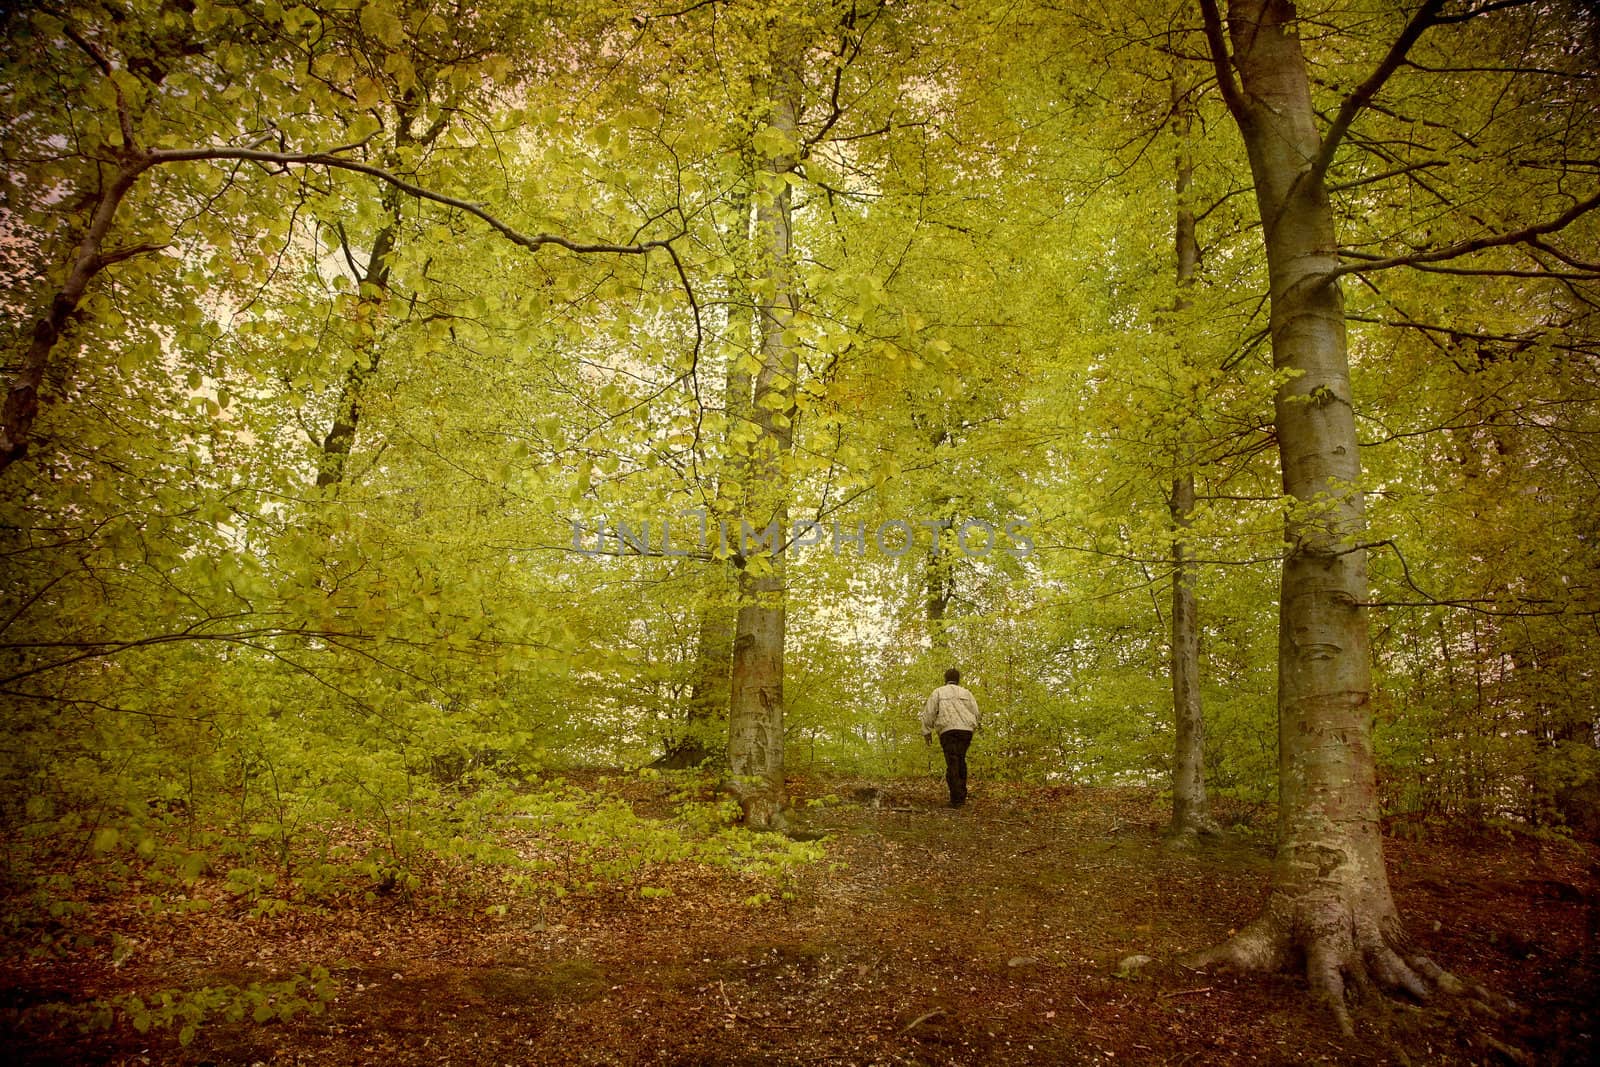 Artistic work of my own in retro style - Postcard from Denmark. - Lonely man walking in the spring forest. More of my images worked together to reflect age and time.